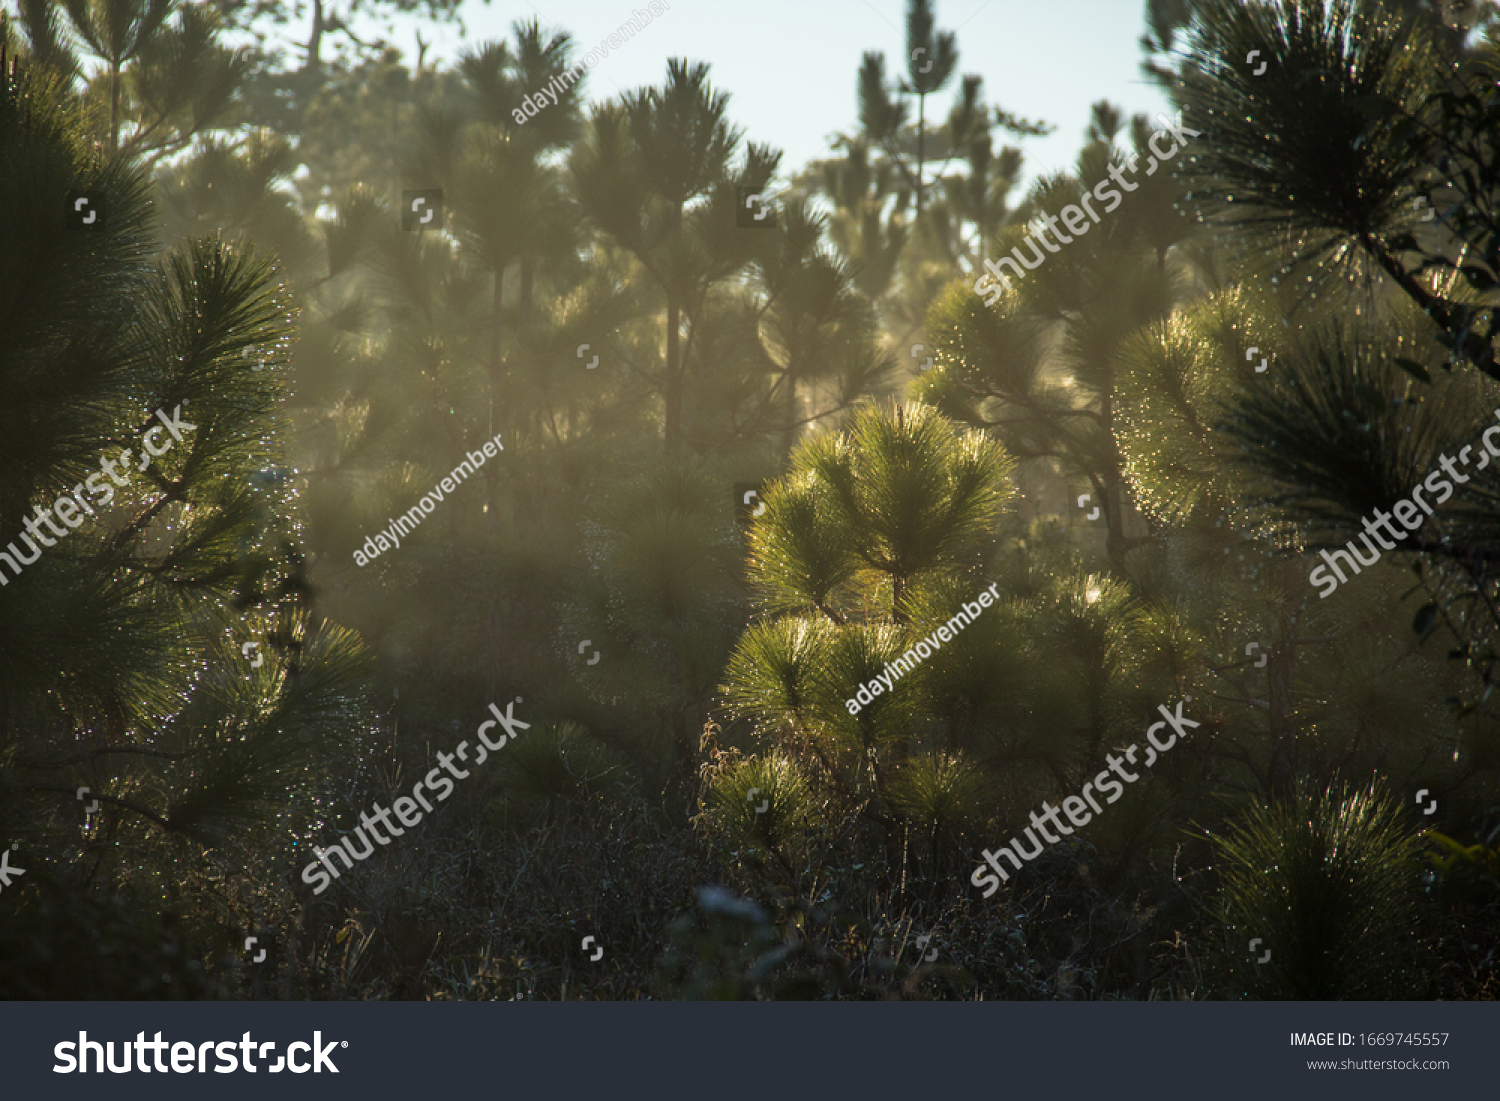 in the moring with Beautiful pine tree at phu kra dueng National Parks , Loei Province, Thailand #1669745557